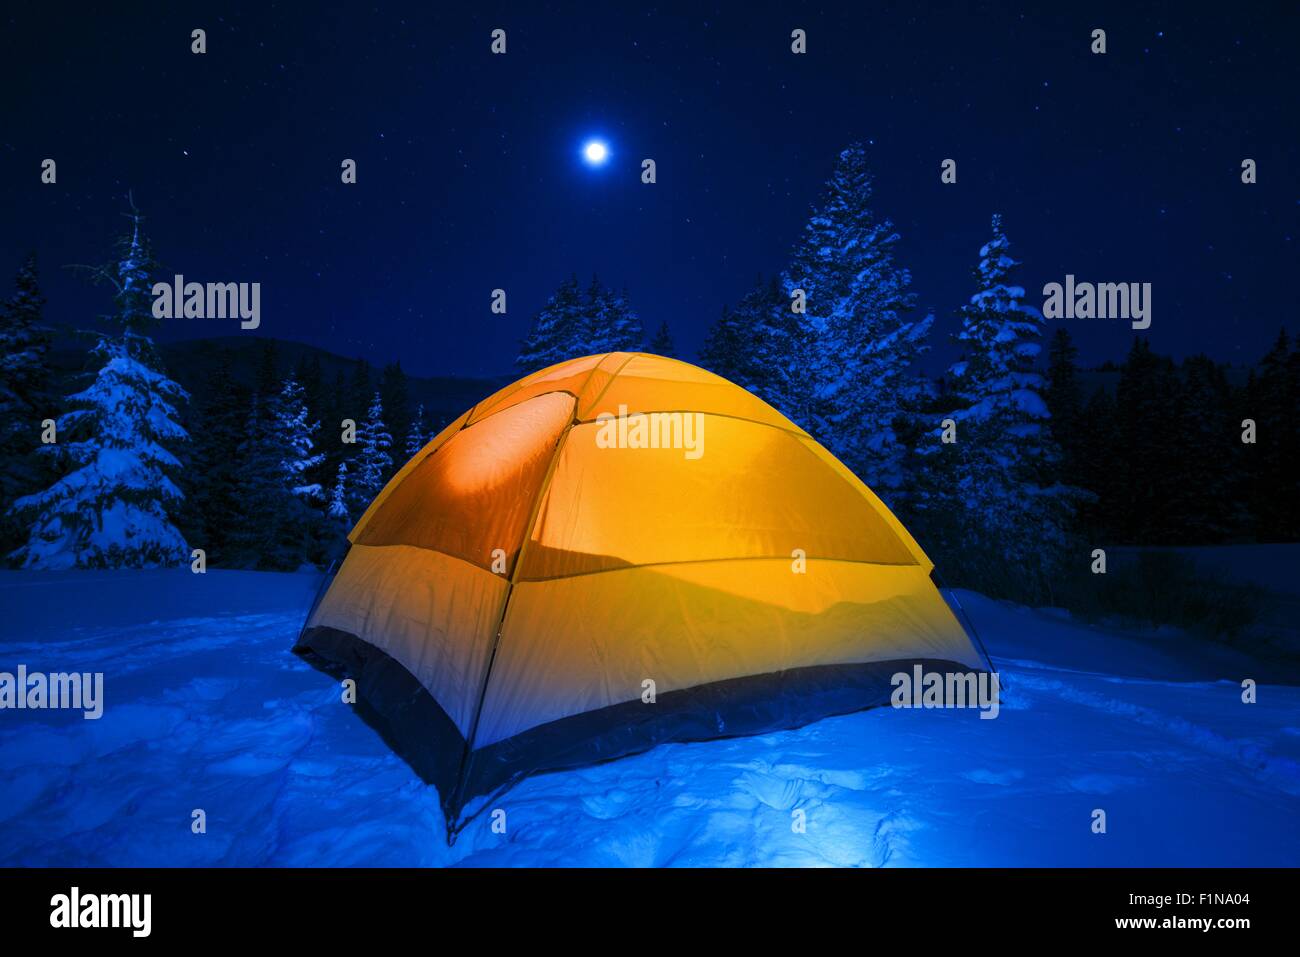 Winter Tent Camping in Colorado Wilderness. Cold Snowy High Country Night in Small Orange Tent. Stock Photo